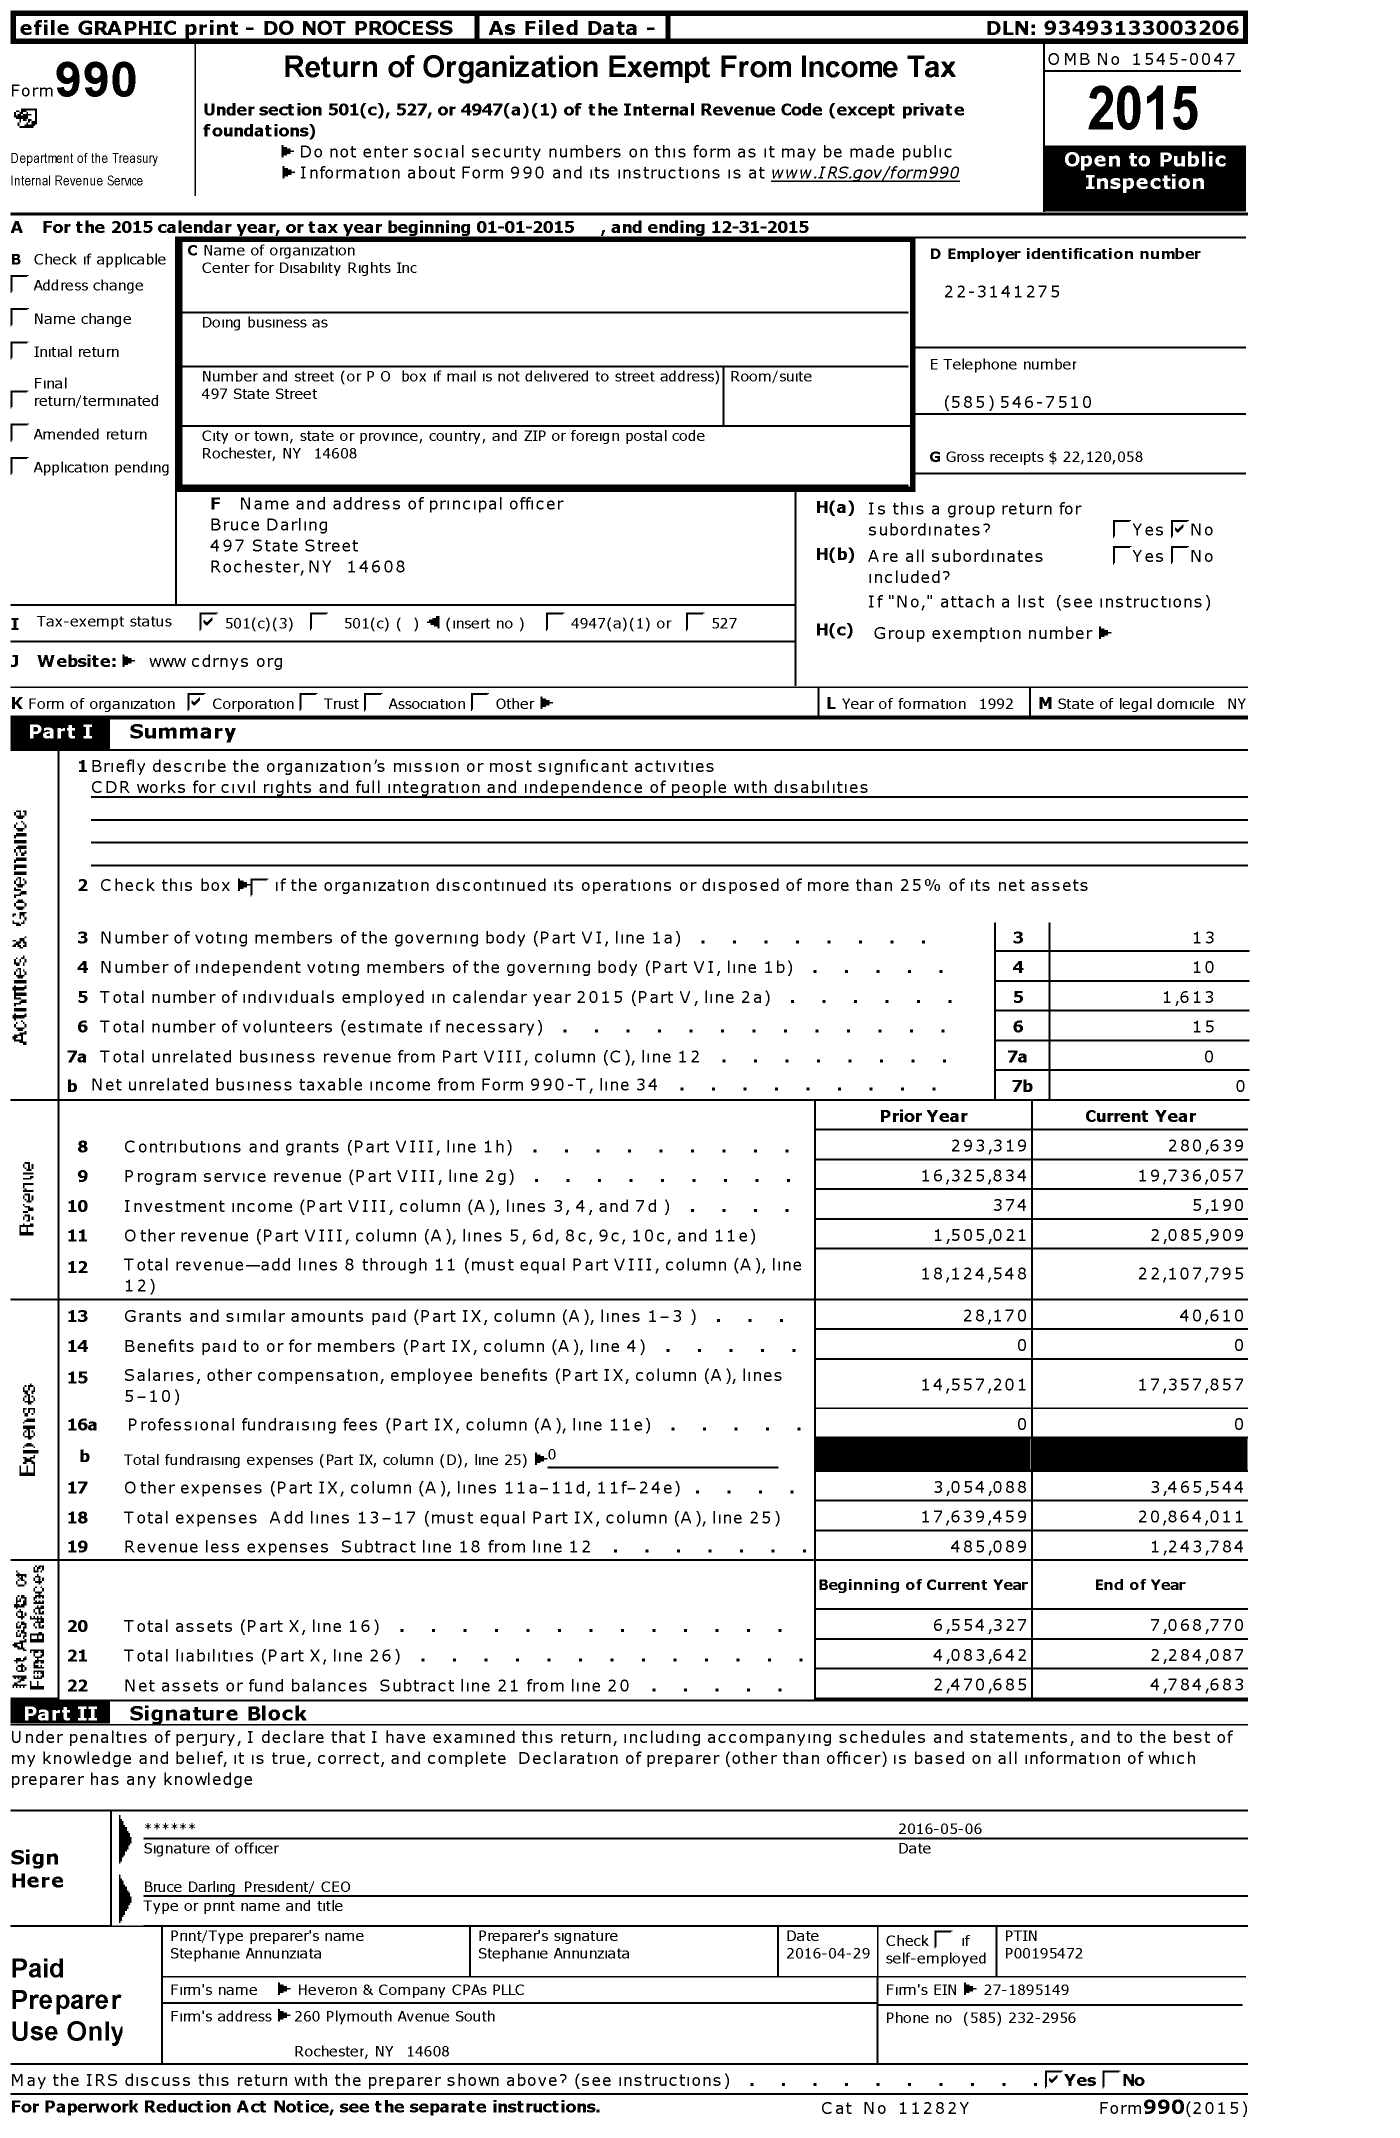 Image of first page of 2015 Form 990 for Center for Disability Rights (CDR)